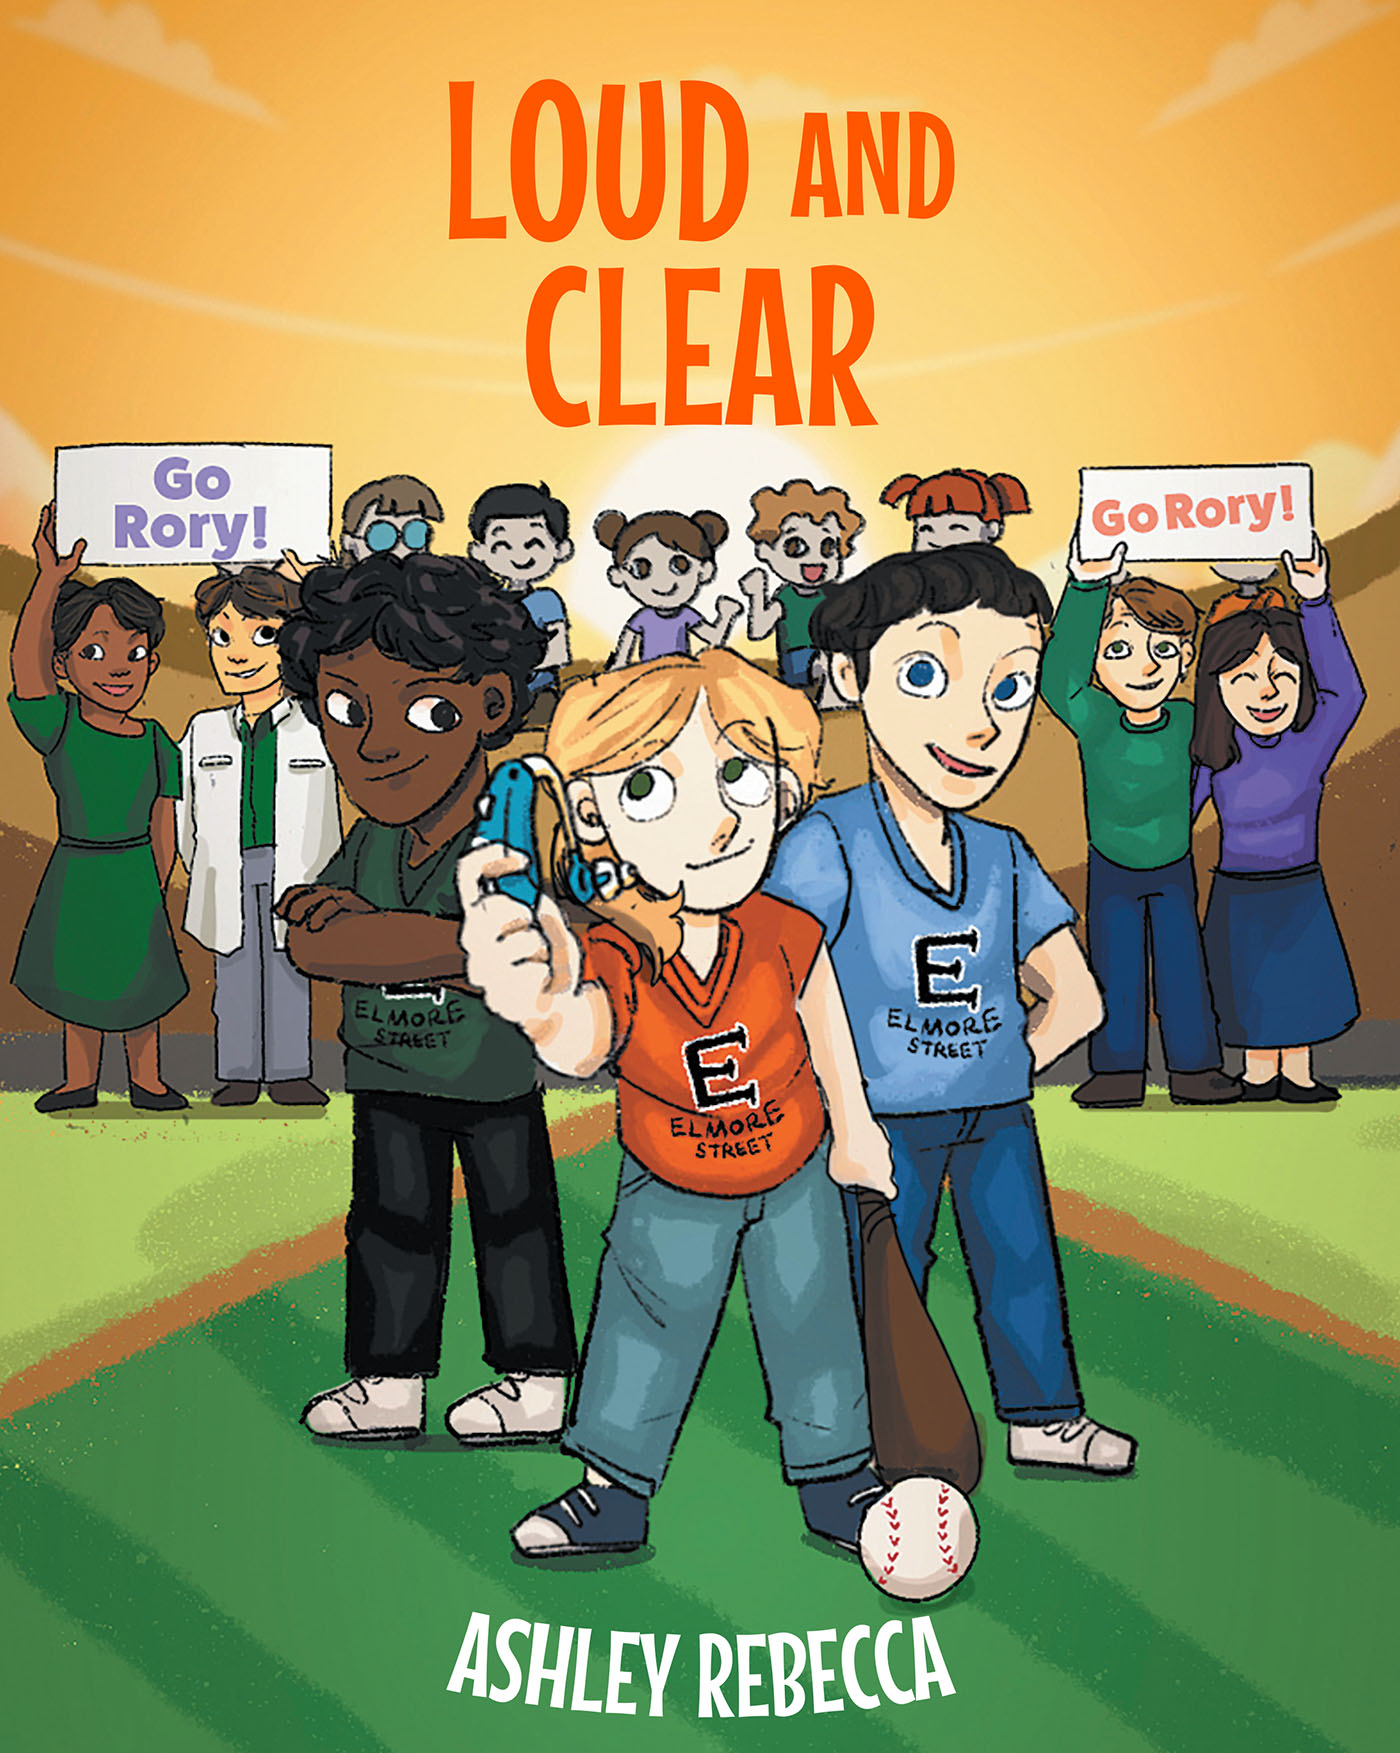 Ashley Rebecca’s New Book, "Loud and Clear," is a Moving Story About Acceptance That Follows a Young Girl with Hearing Loss